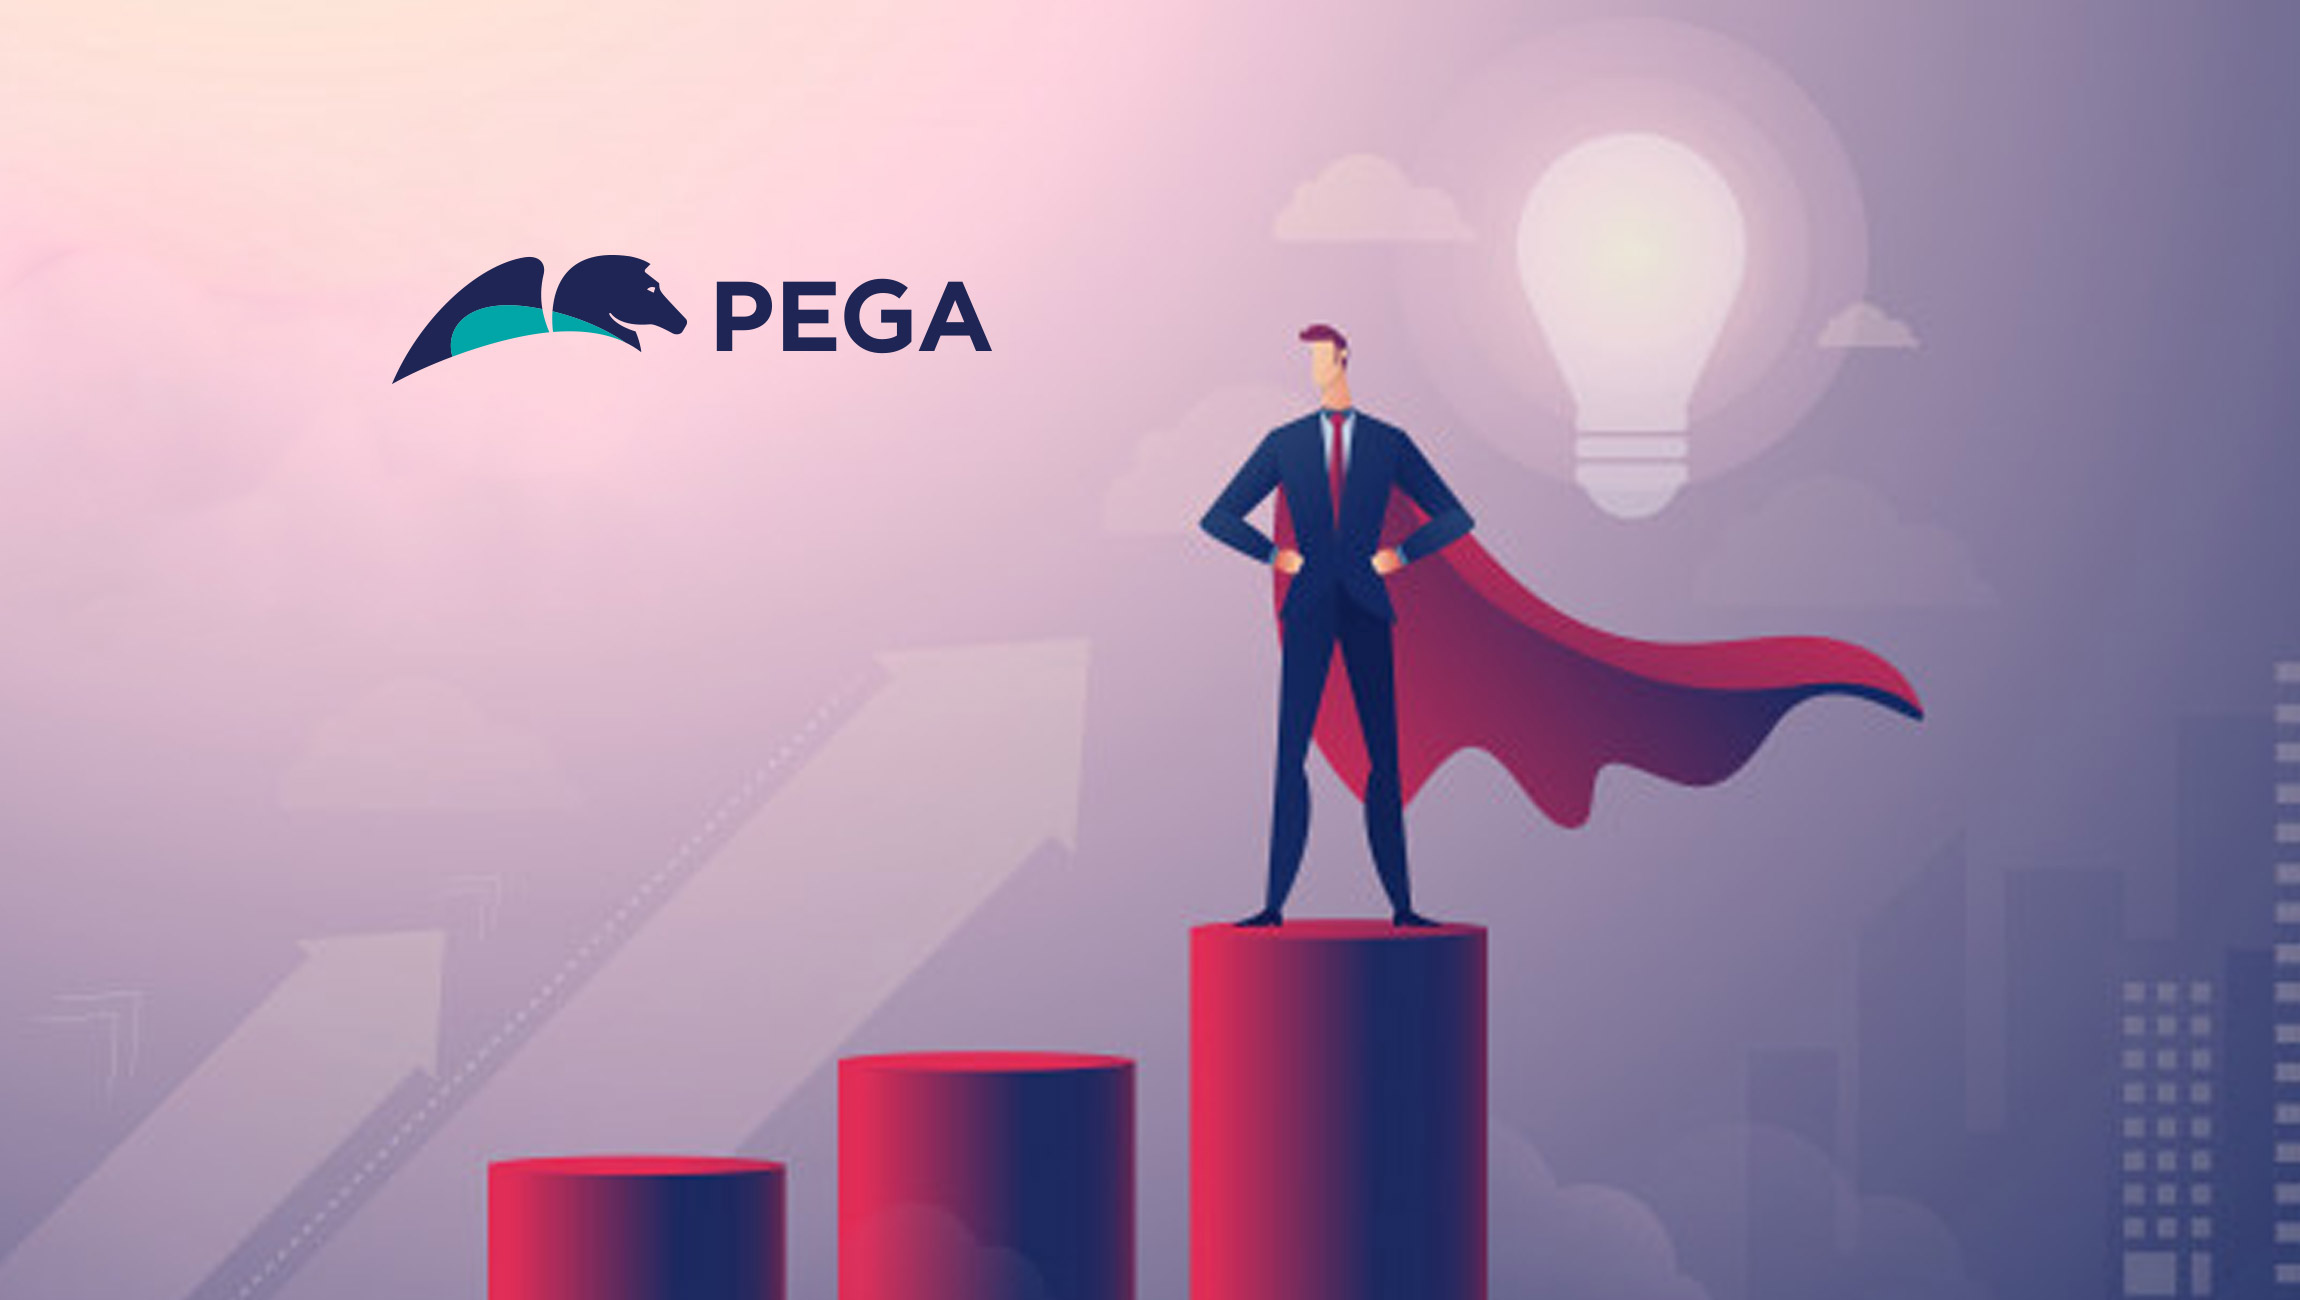 Pega Ranked a Category Leader in KYC Solutions by Chartis Research for Third Consecutive Year